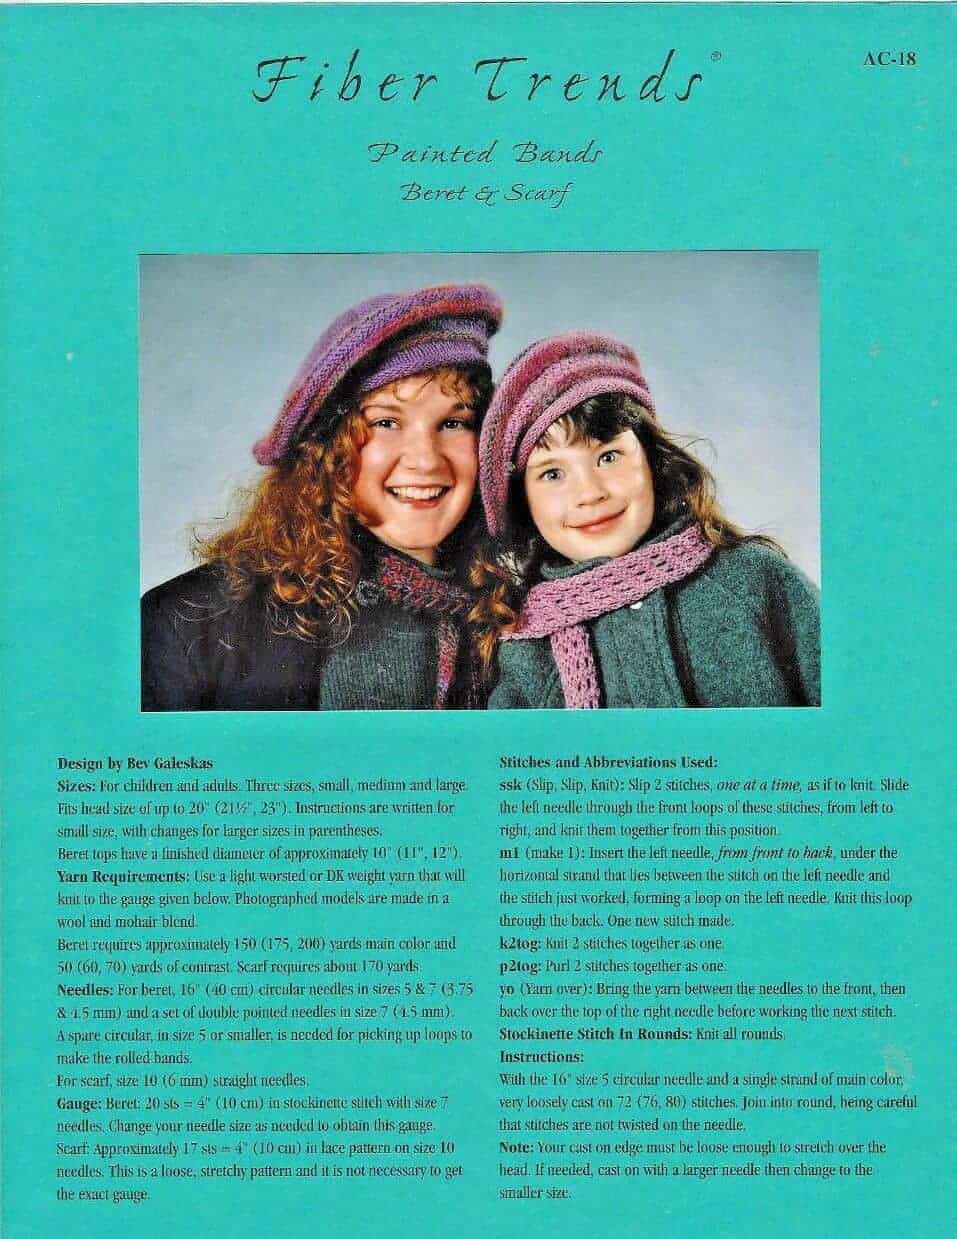 CUTE MATCHING BERET & SCARF to KNIT in DK or LT WORSTED WT YARN by FIBER TRENDS 